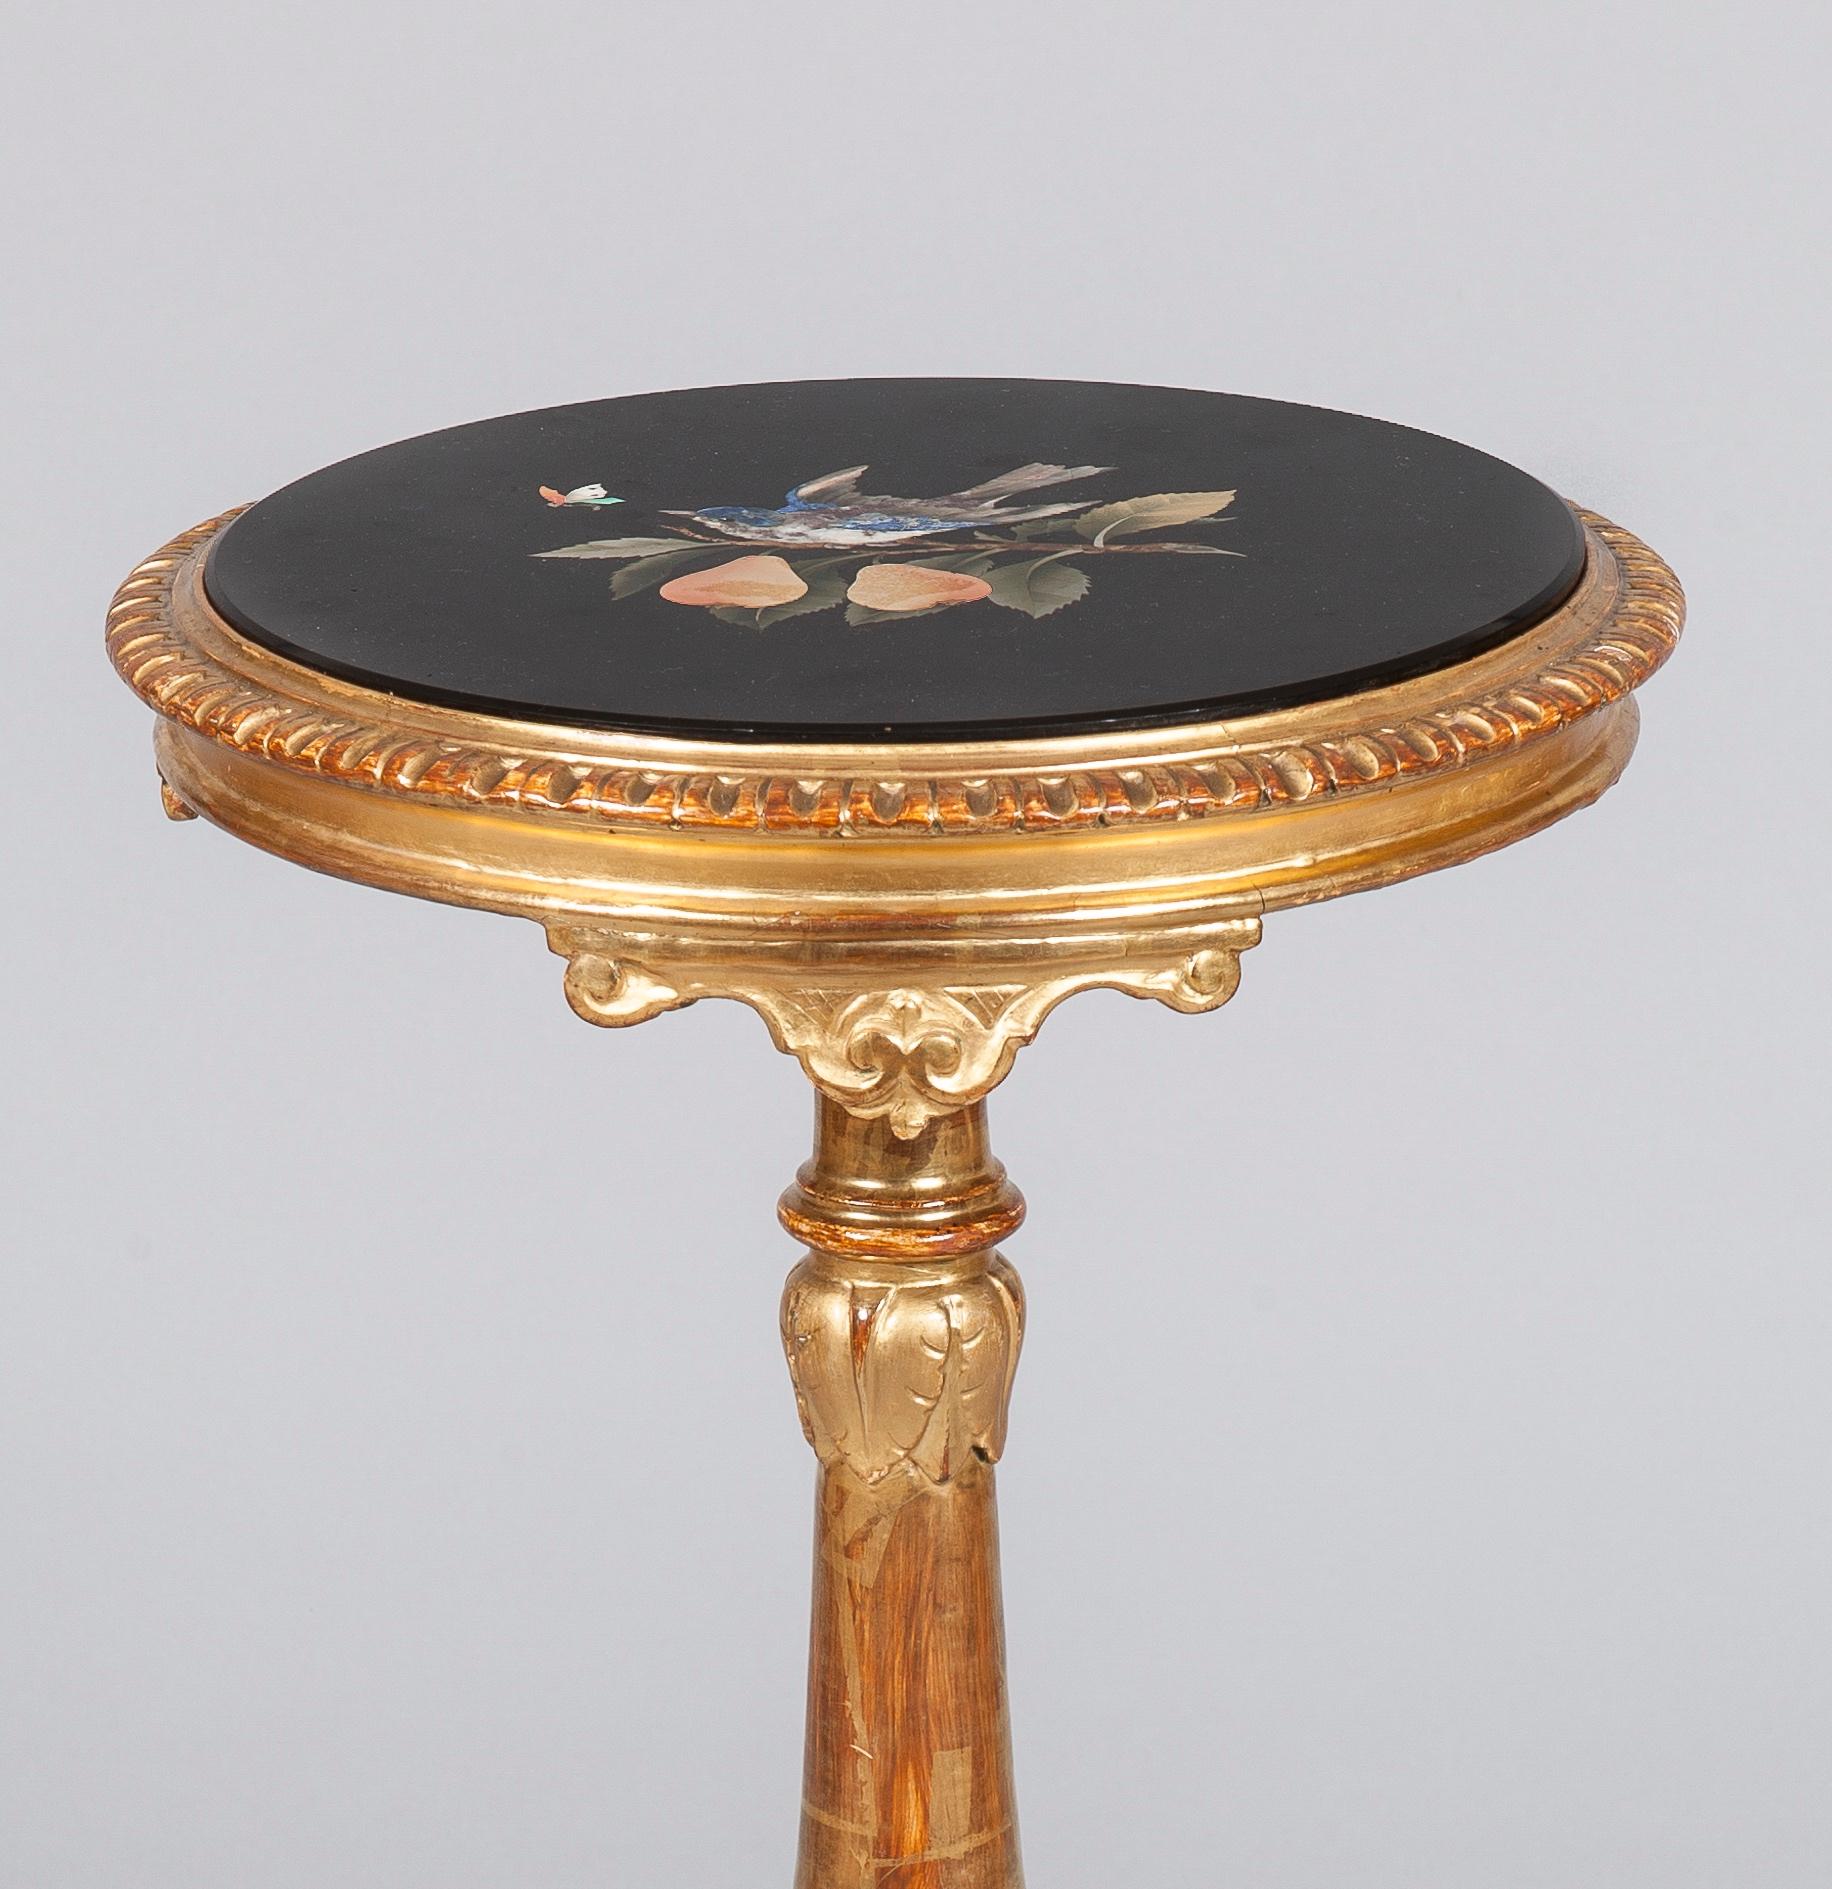 Revival Italian Giltwood and Pietra Dura Inlaid Stone Topped Round Table, 19th Century